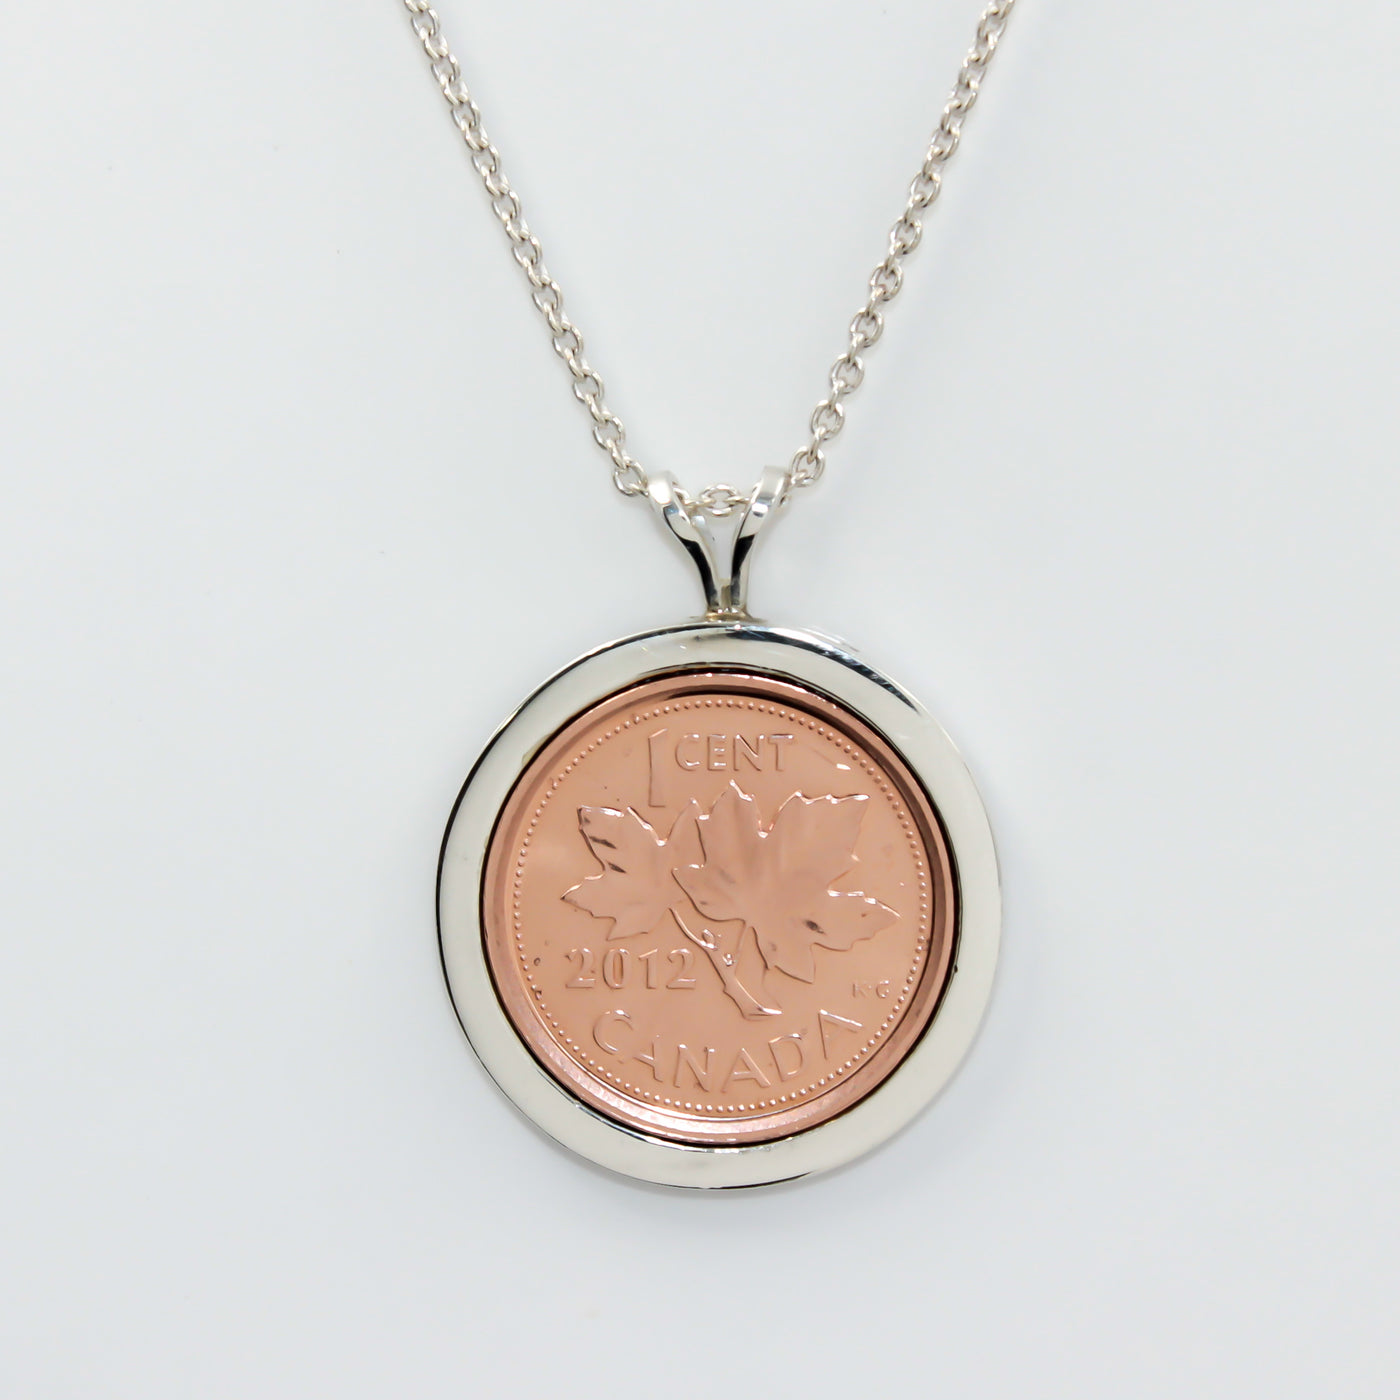 Handmade Sterling Silver "Penny For Your Thought" Pendant